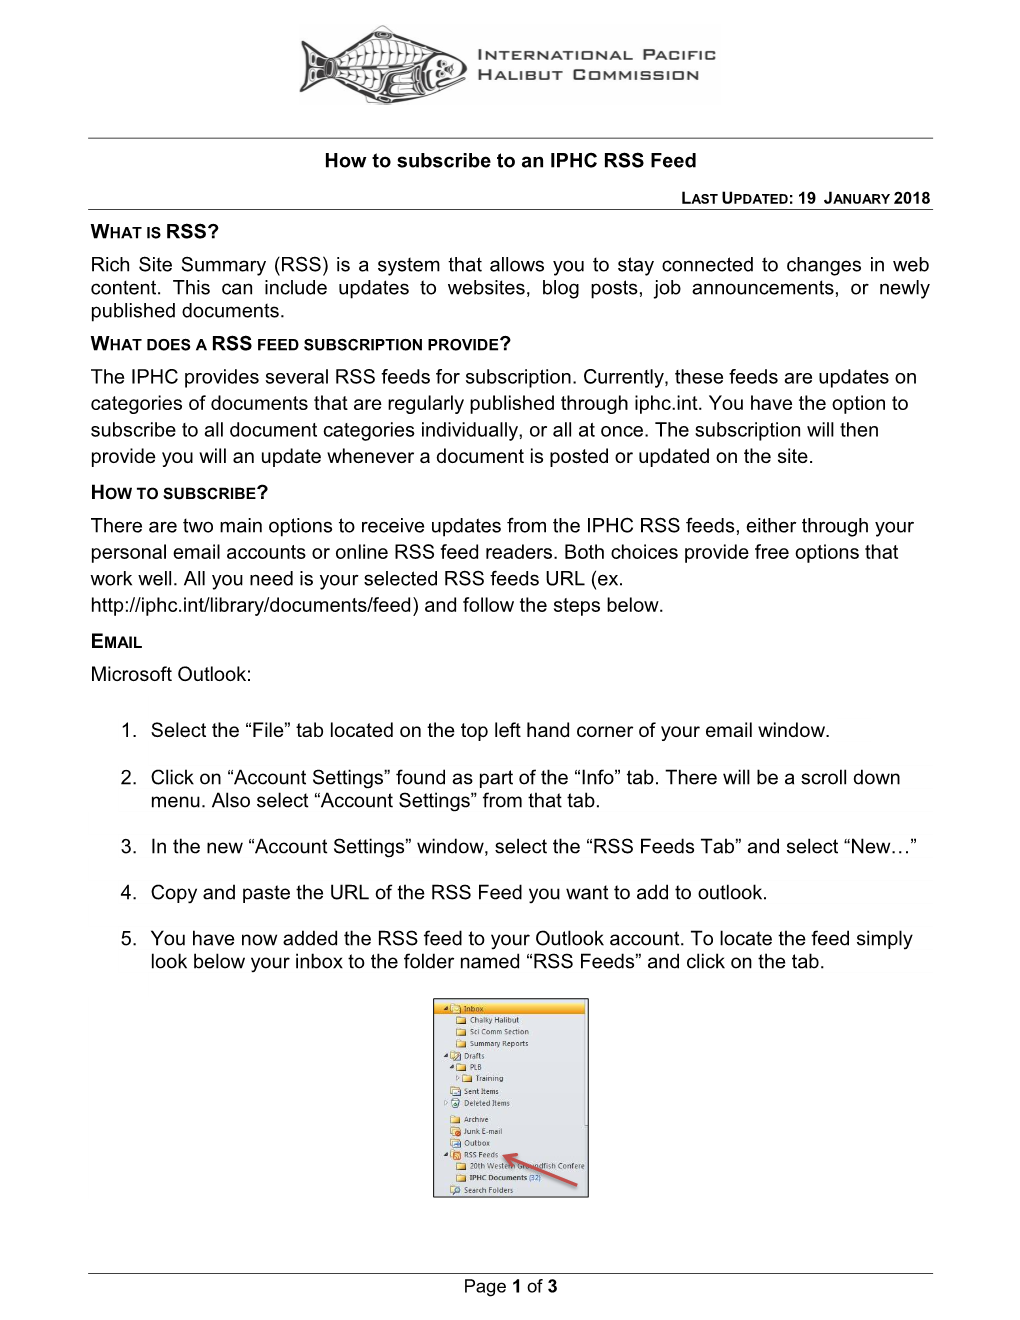 How to Subscribe to an IPHC RSS Feed Rich Site Summary